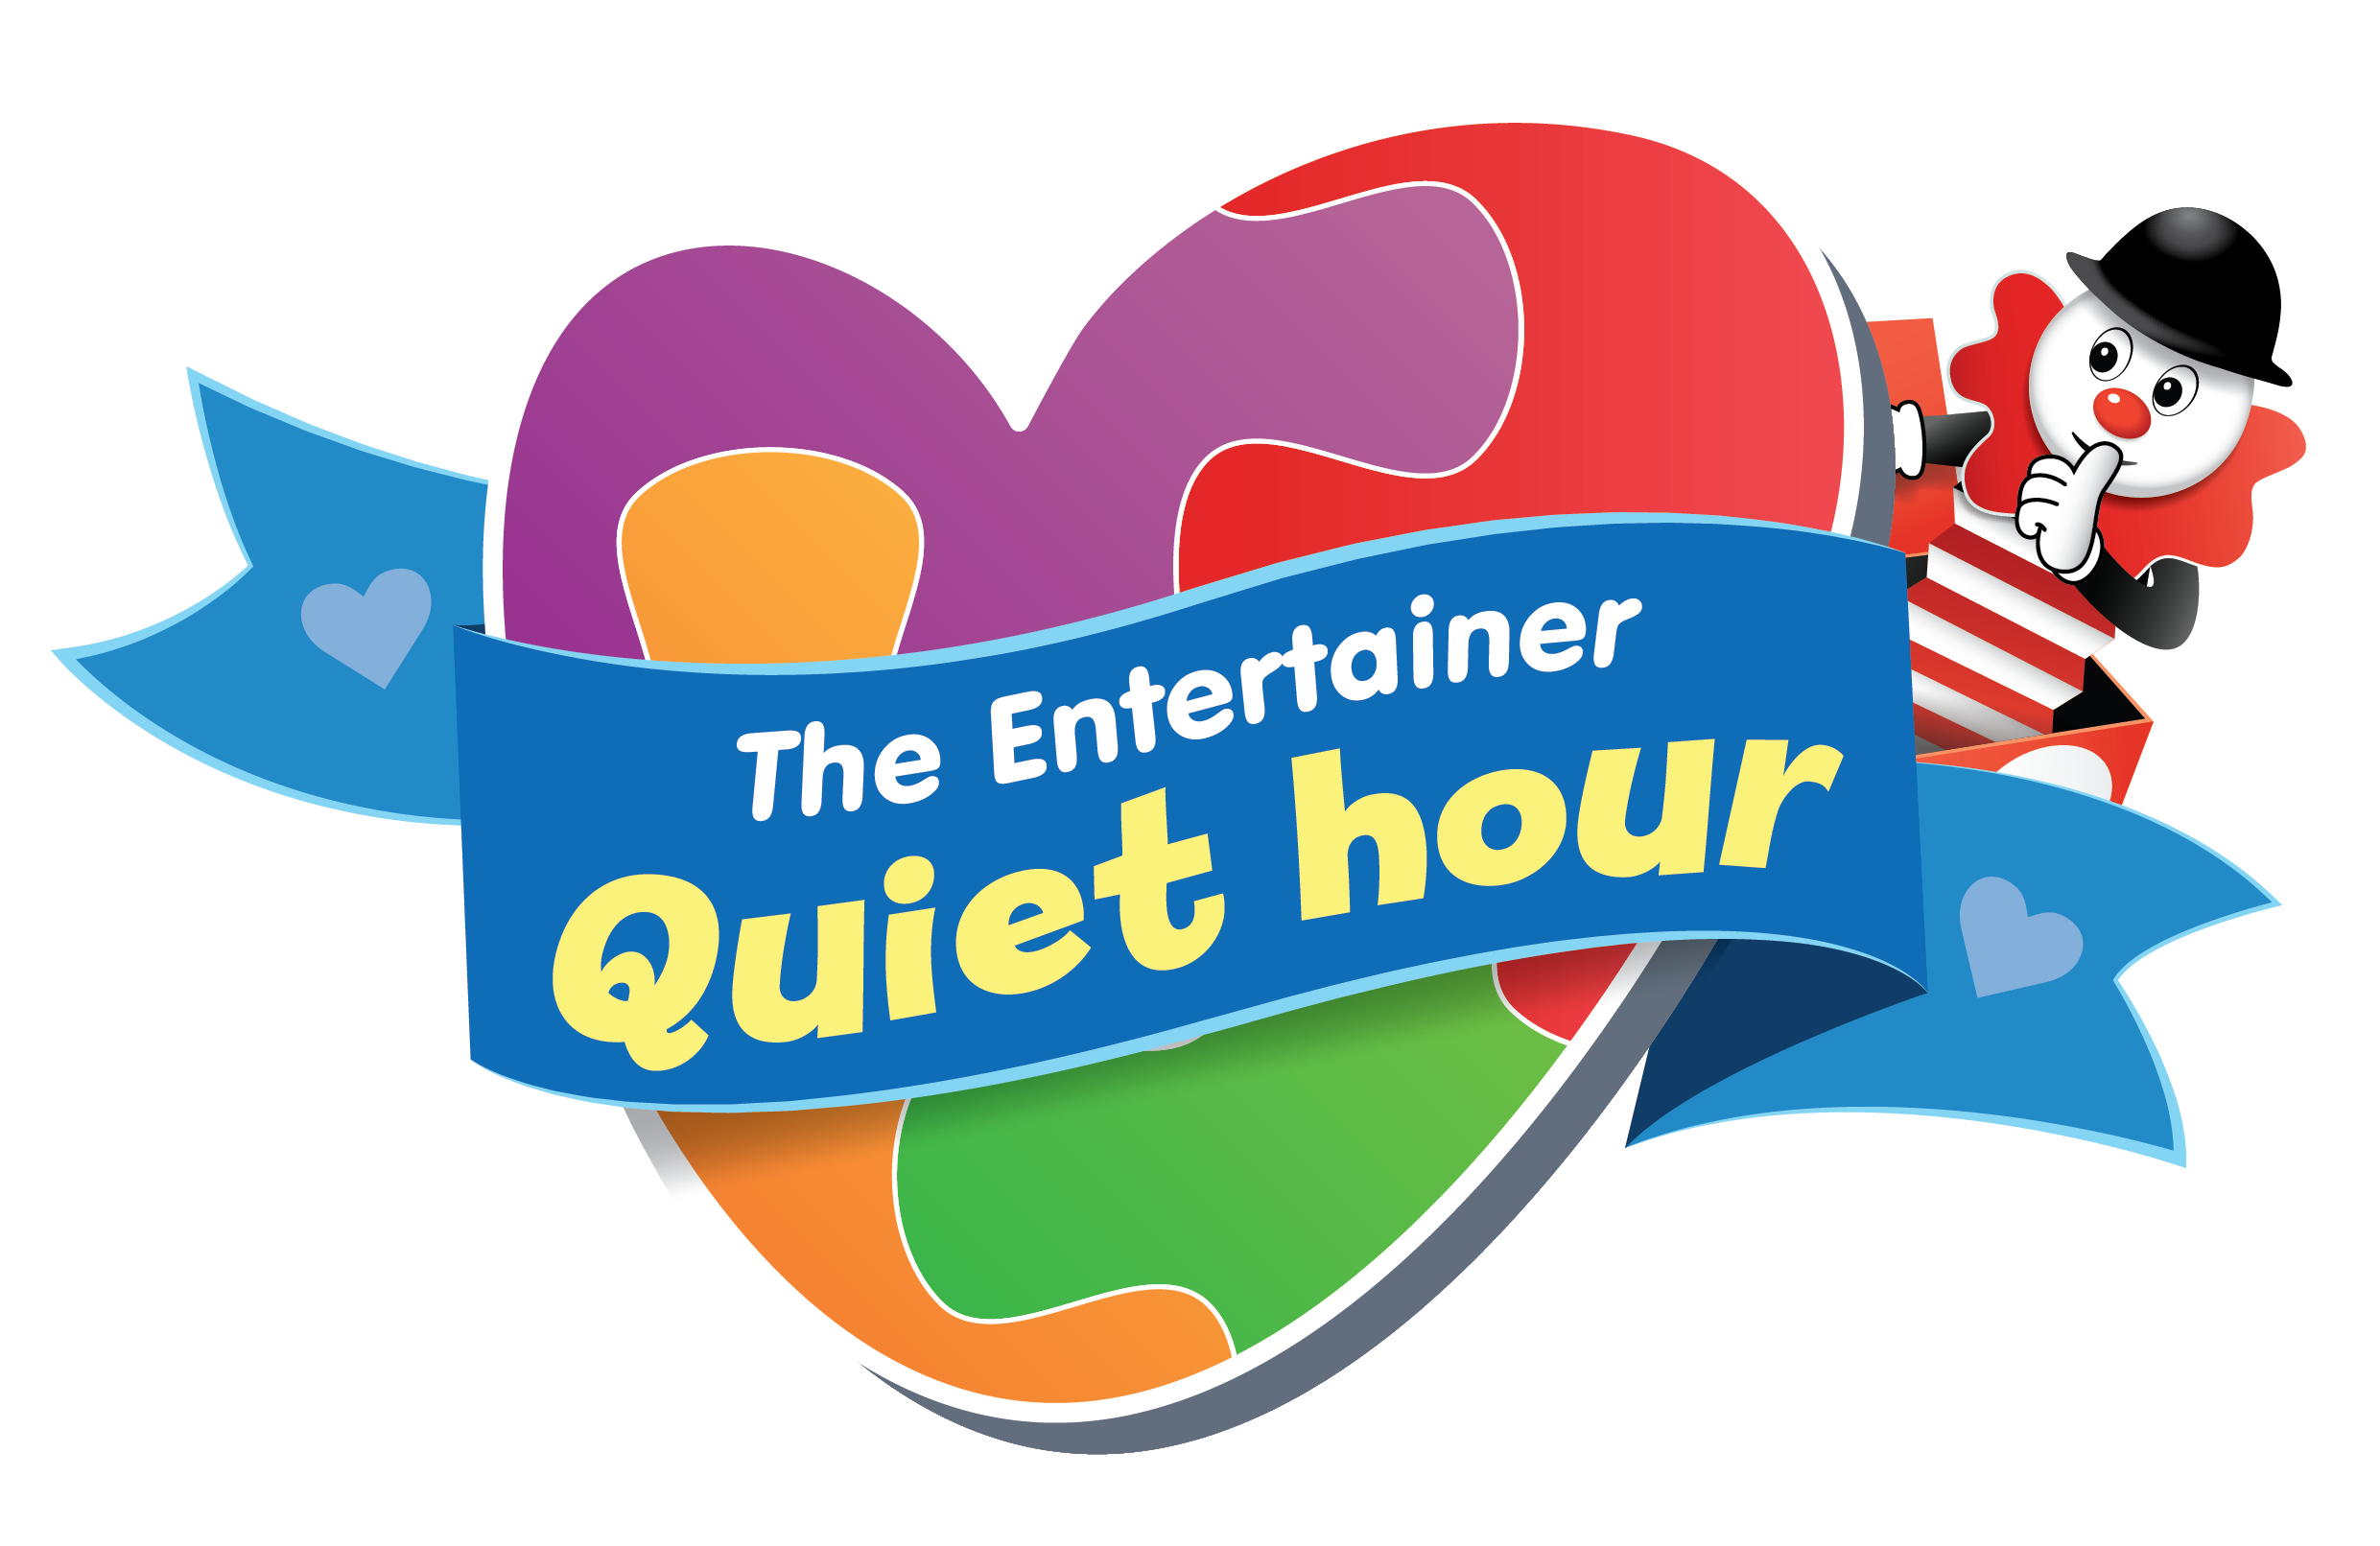 The Entertainer extends its Quiet Hour | Silverburn Shopping Centre